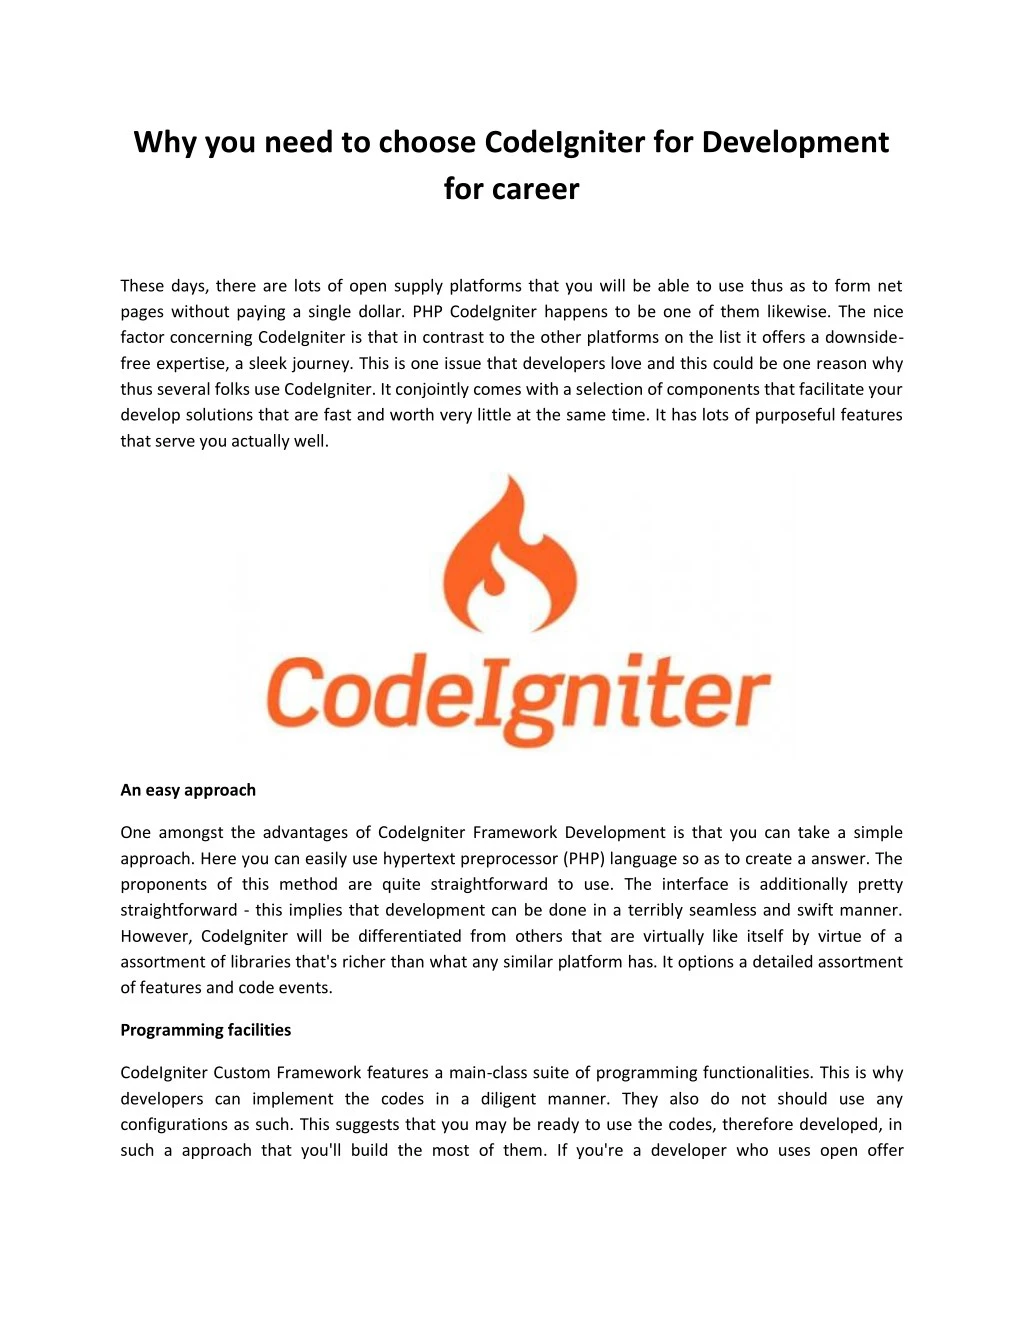 why you need to choose codeigniter